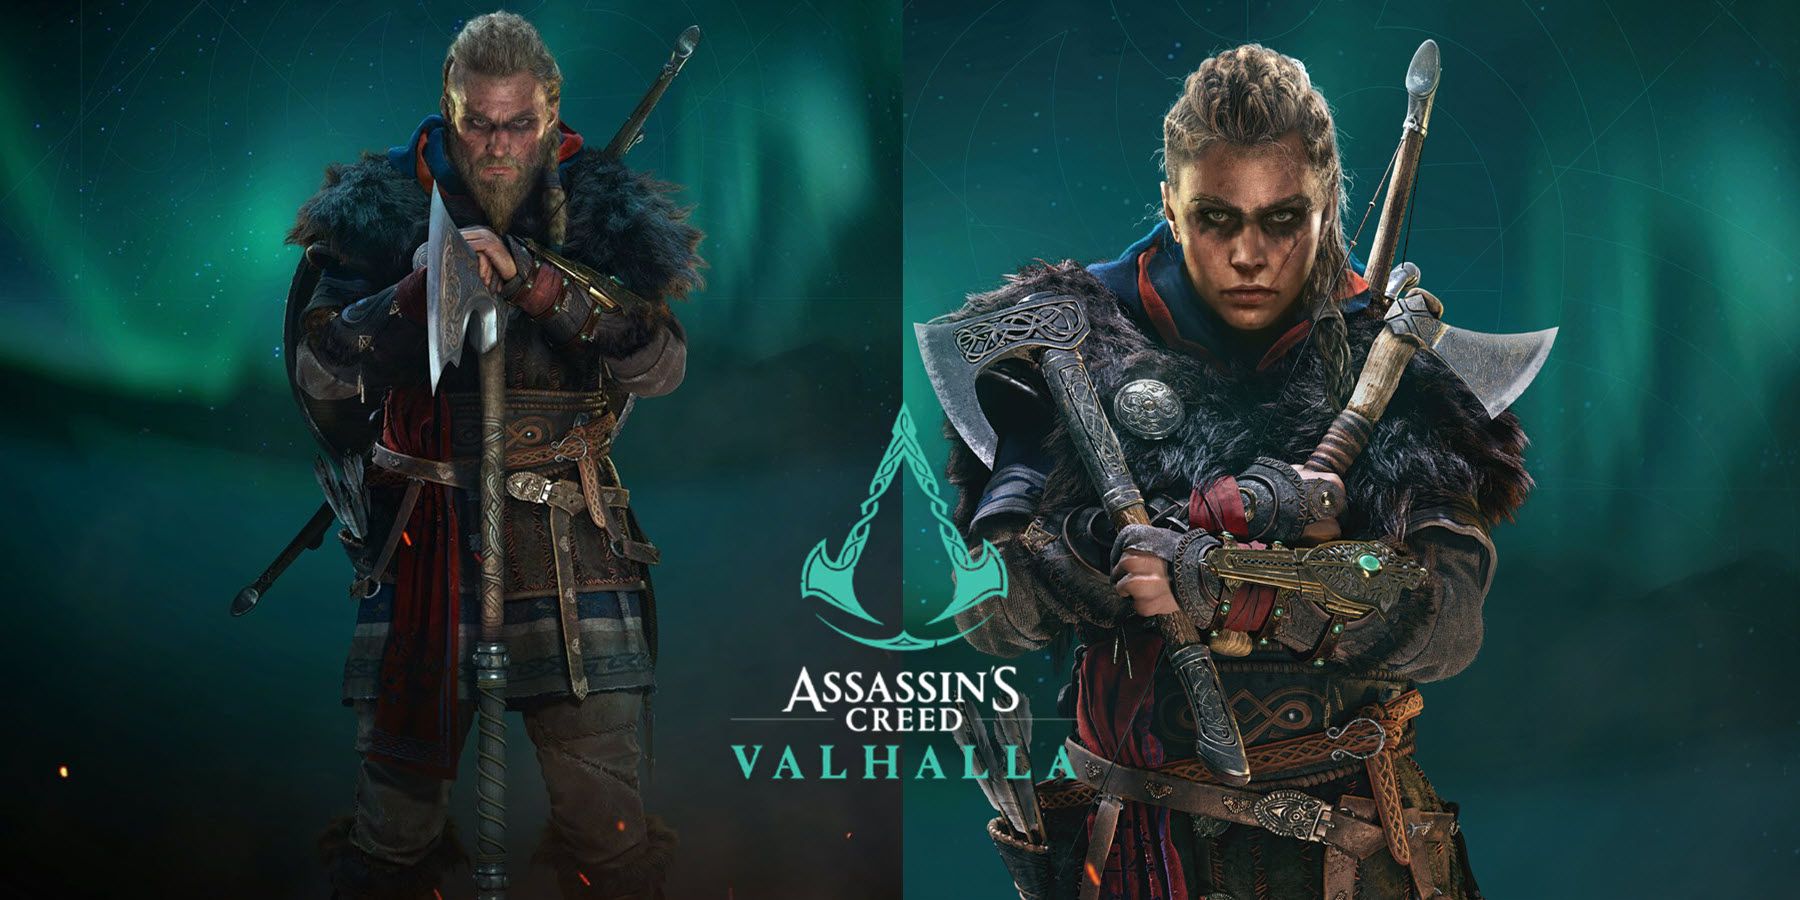 Assassin's Creed Valhalla Lets You Play as a Male or Female